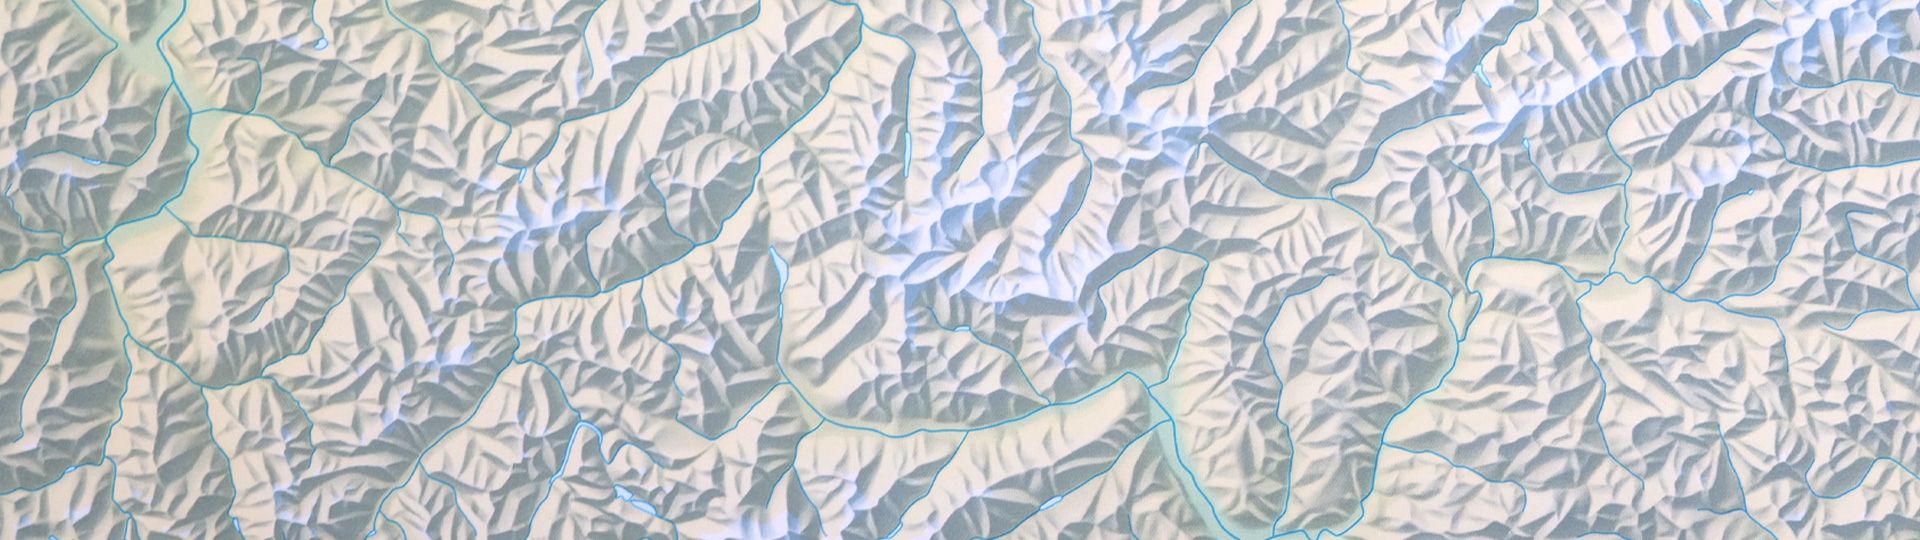 Relief Map of the Alps